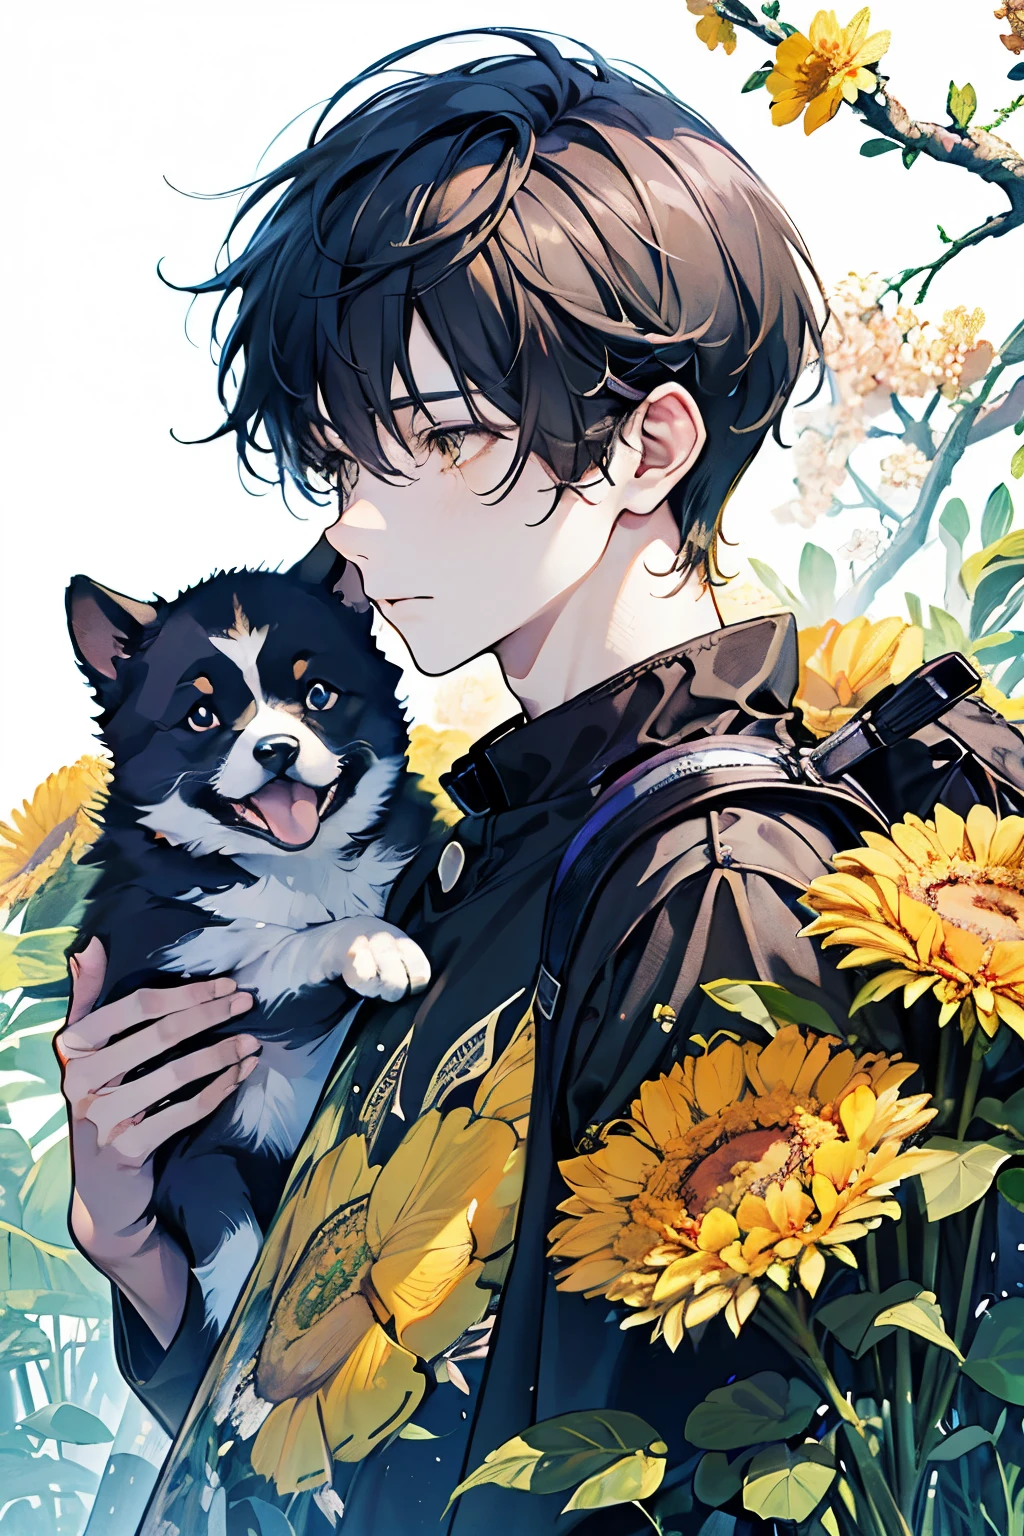 ((young men's:1.1)),(Oversized floral T-shirt:1.35),Prompt: An incredibly charming  carrying a backpack, accompanied by her adorable puppy, enjoying a lovely spring outing surrounded by beautiful yellow flowers and natural scenery. The illustration is in high definition at 4k resolution, with highly-detailed facial features and cartoon-style visuals.